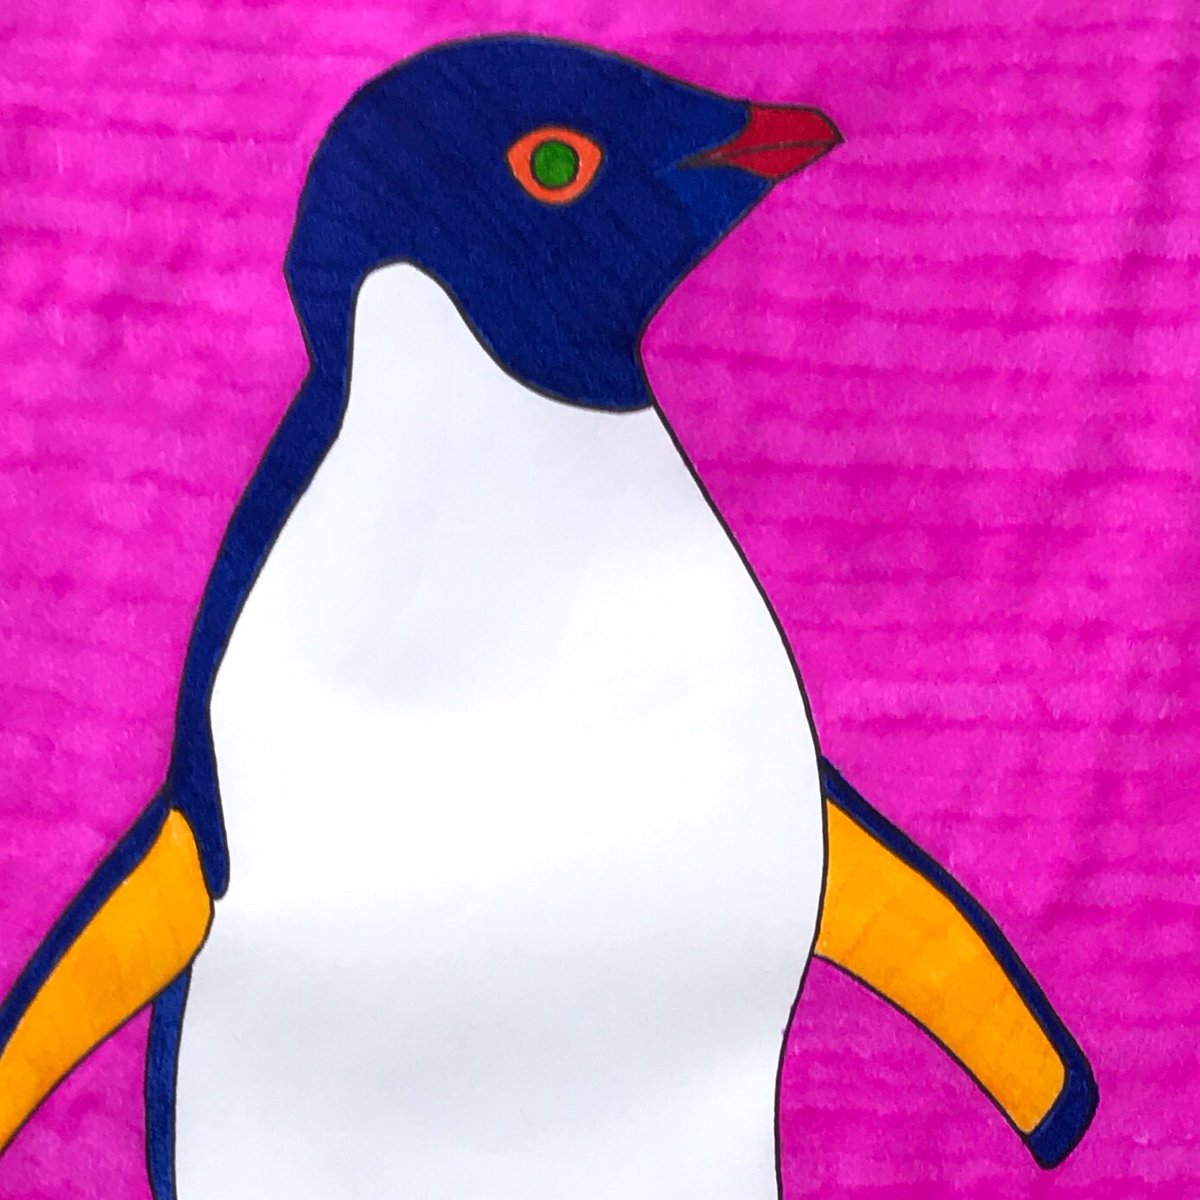 The offer has been going for only 2 weeks & fits with my belief that everyone should have access to original artwork. I’ve already had orders from Switzerland to California.Pink Penguin (2020)